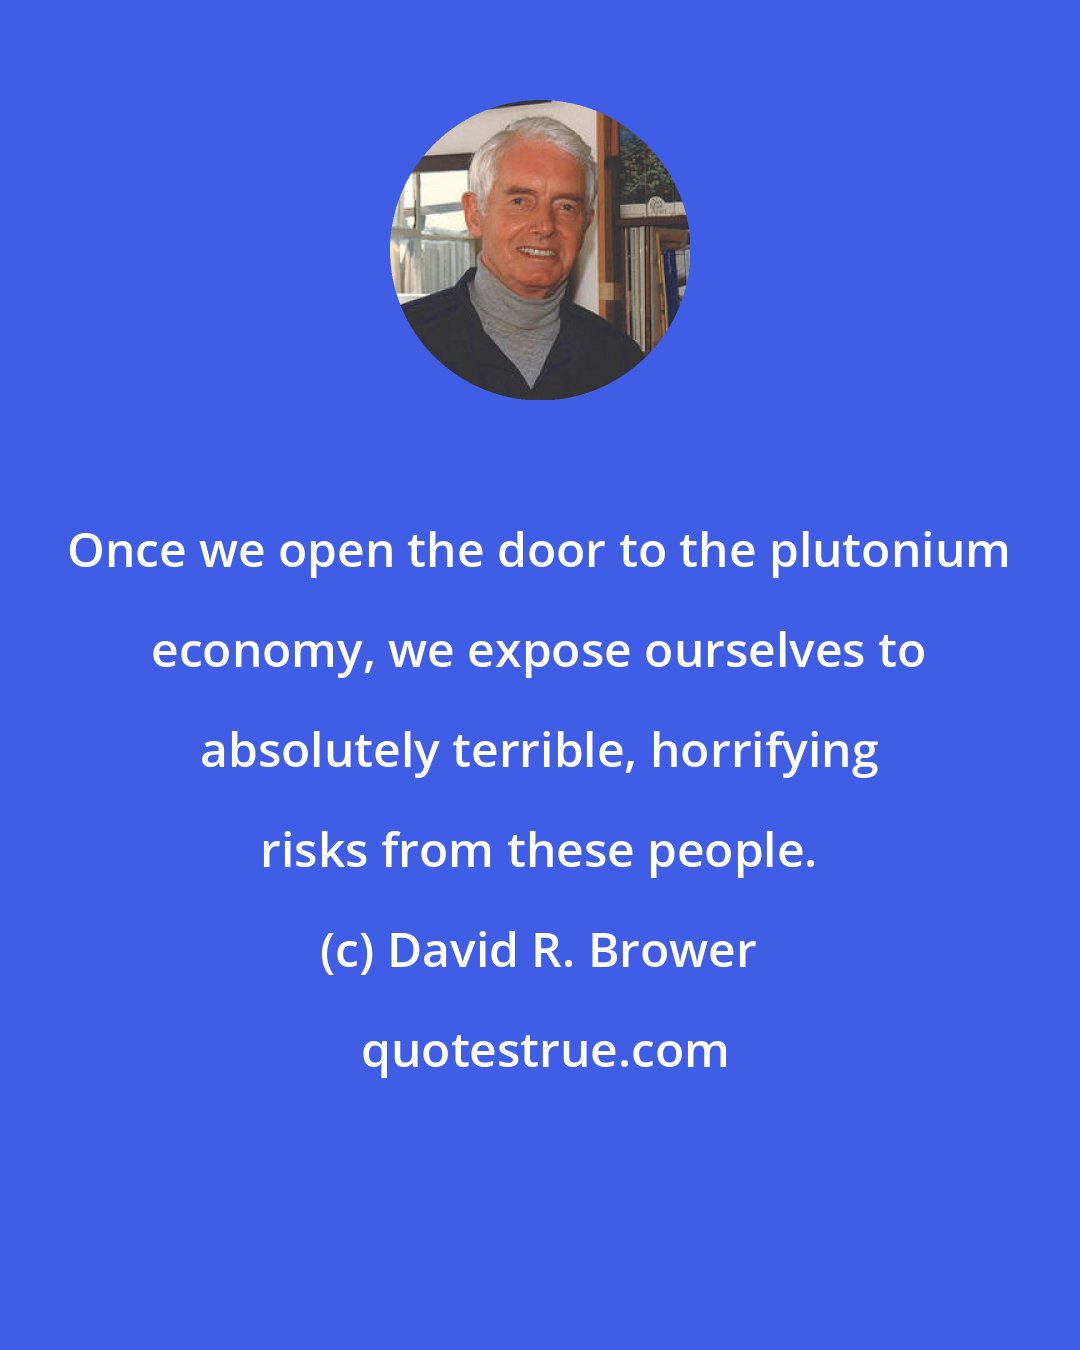 David R. Brower: Once we open the door to the plutonium economy, we expose ourselves to absolutely terrible, horrifying risks from these people.